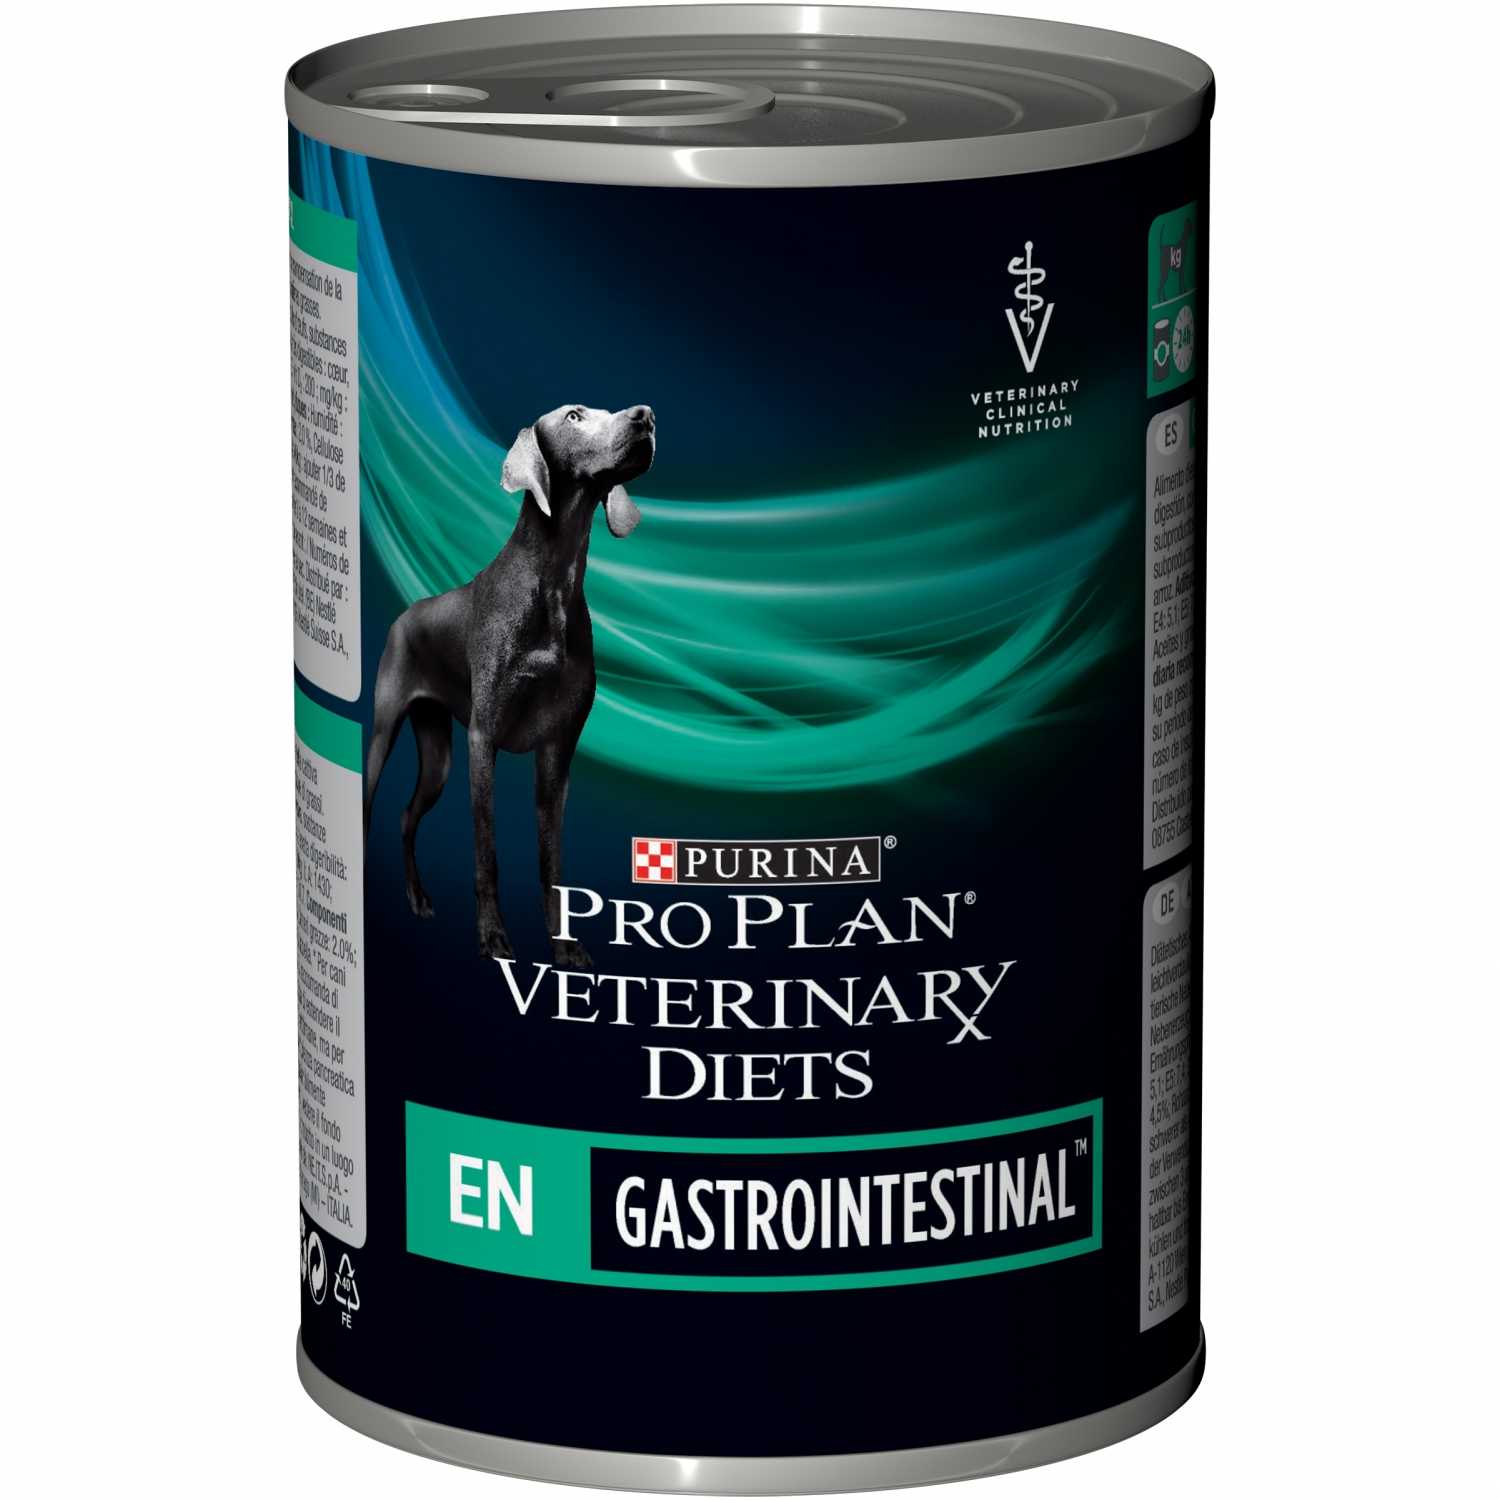 PURINA PRO PLAN VETERINARY DIET GASTROINTESTINAL CANINE MOUSSE 400 G